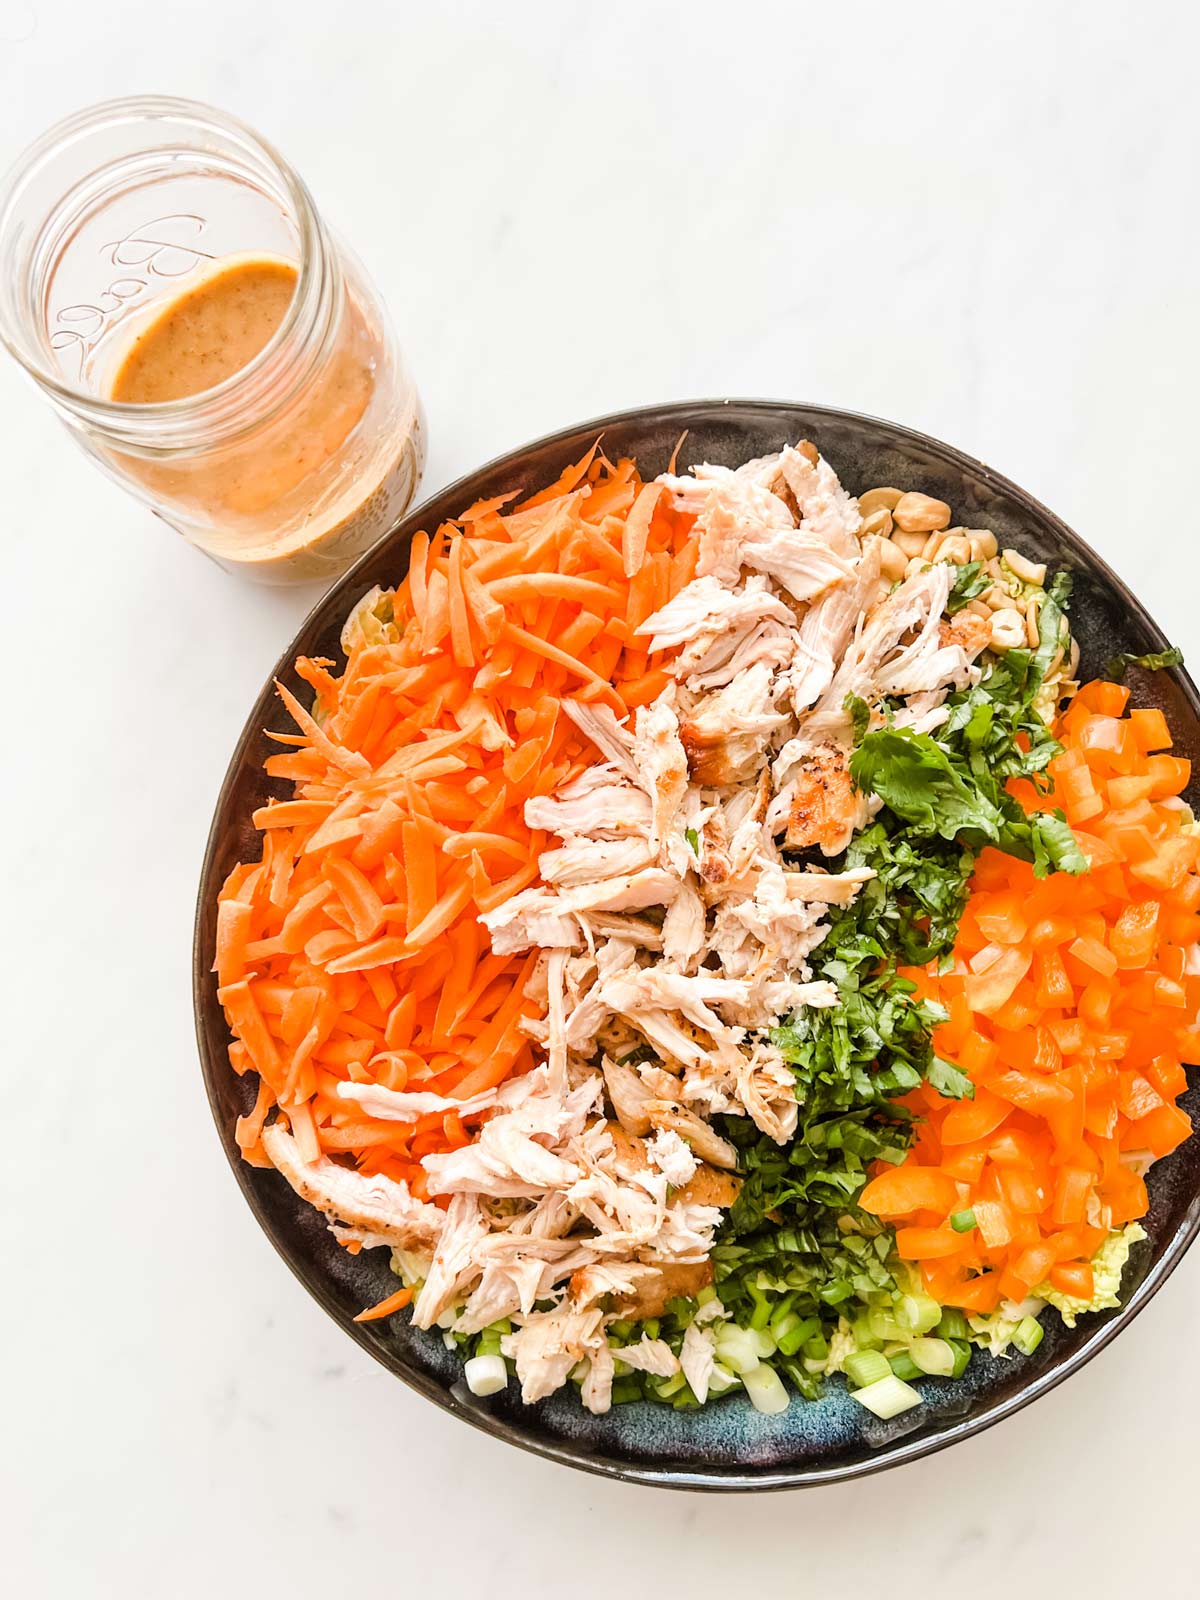 A large navy blue bowl with shredded napa cabbage, shredded carrots, cooked shredded chicken, cilantro, basil, and diced pepper sitting next to a jar of thai salad dressing.